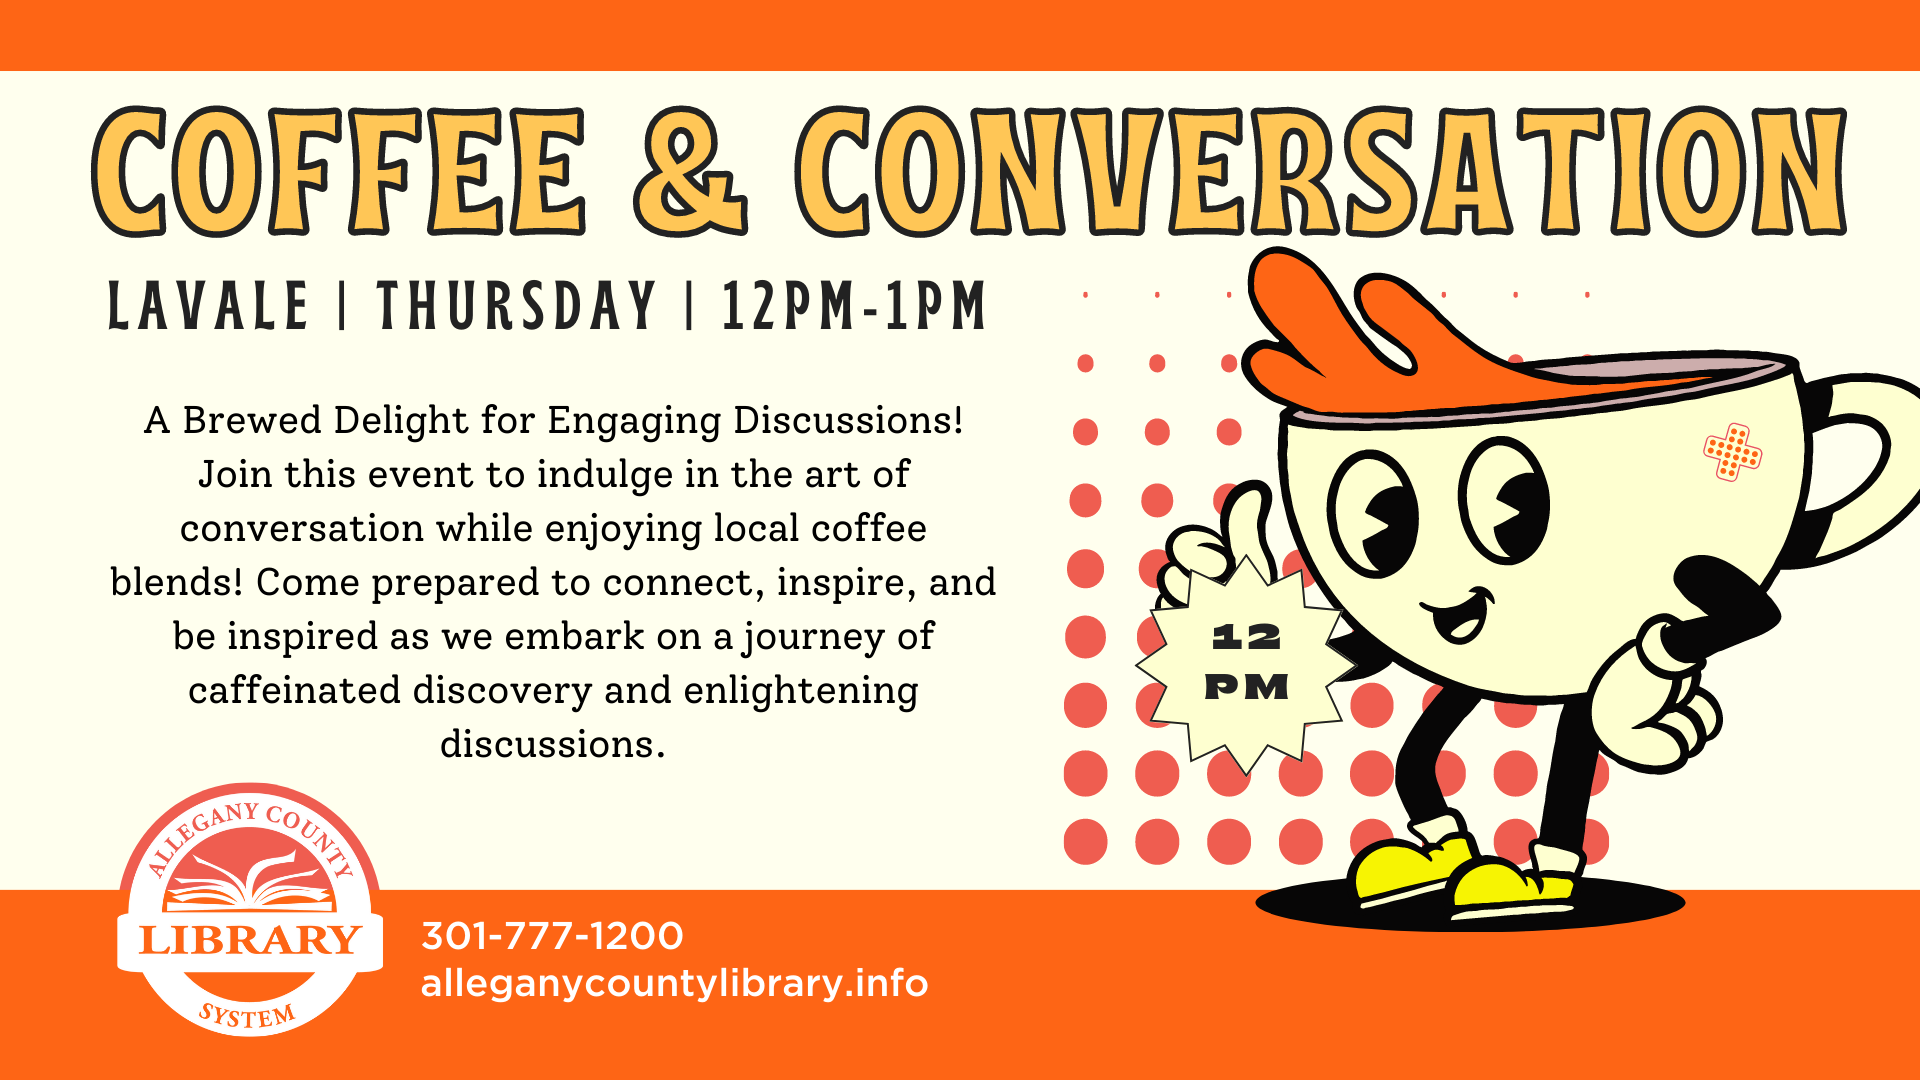 Coffee & Conversation event details with cartoon coffee cup smiling